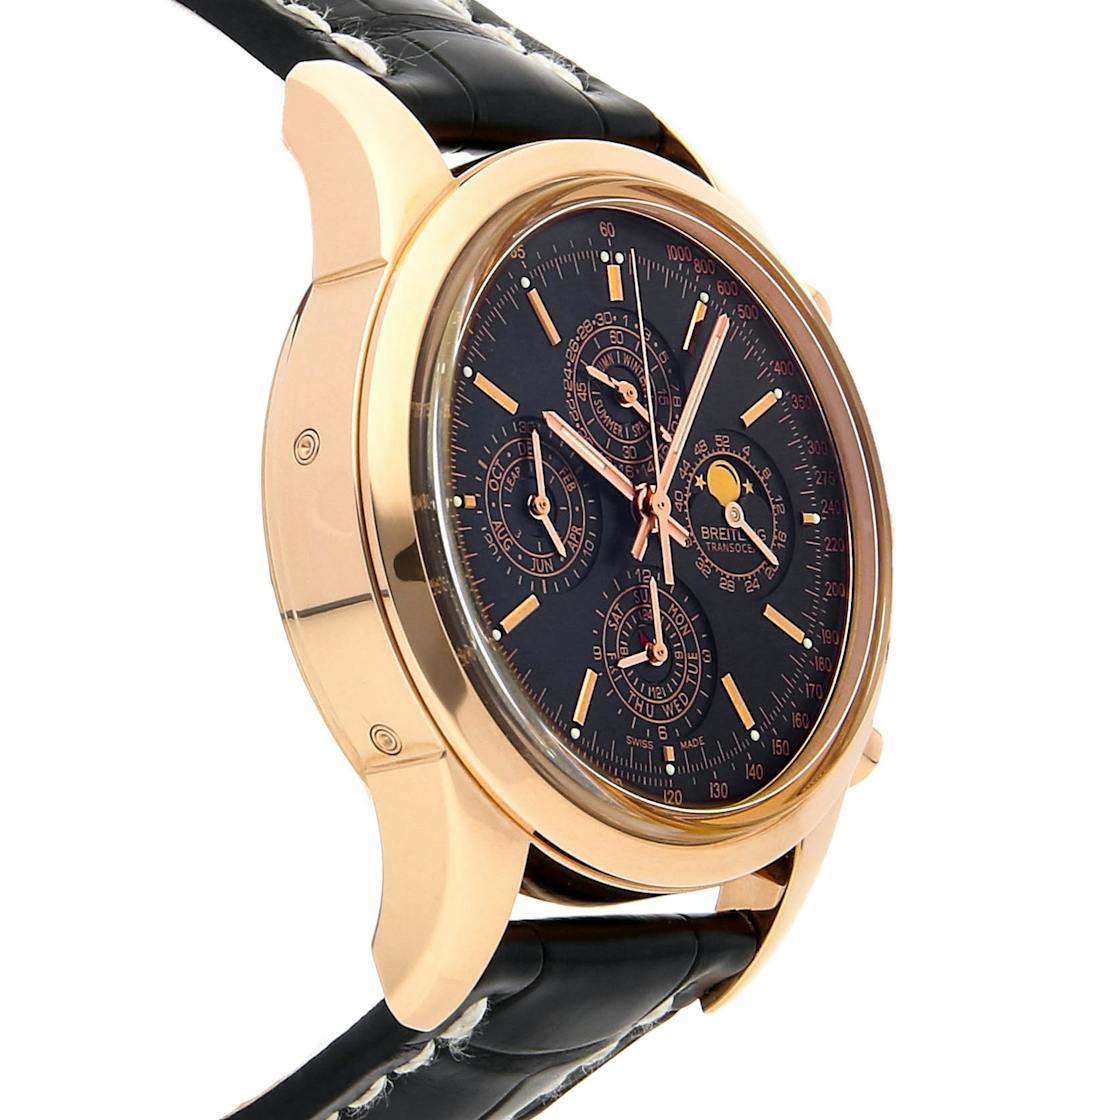 Introducing The Breitling Transocean Chronograph GMT - King Jewelers